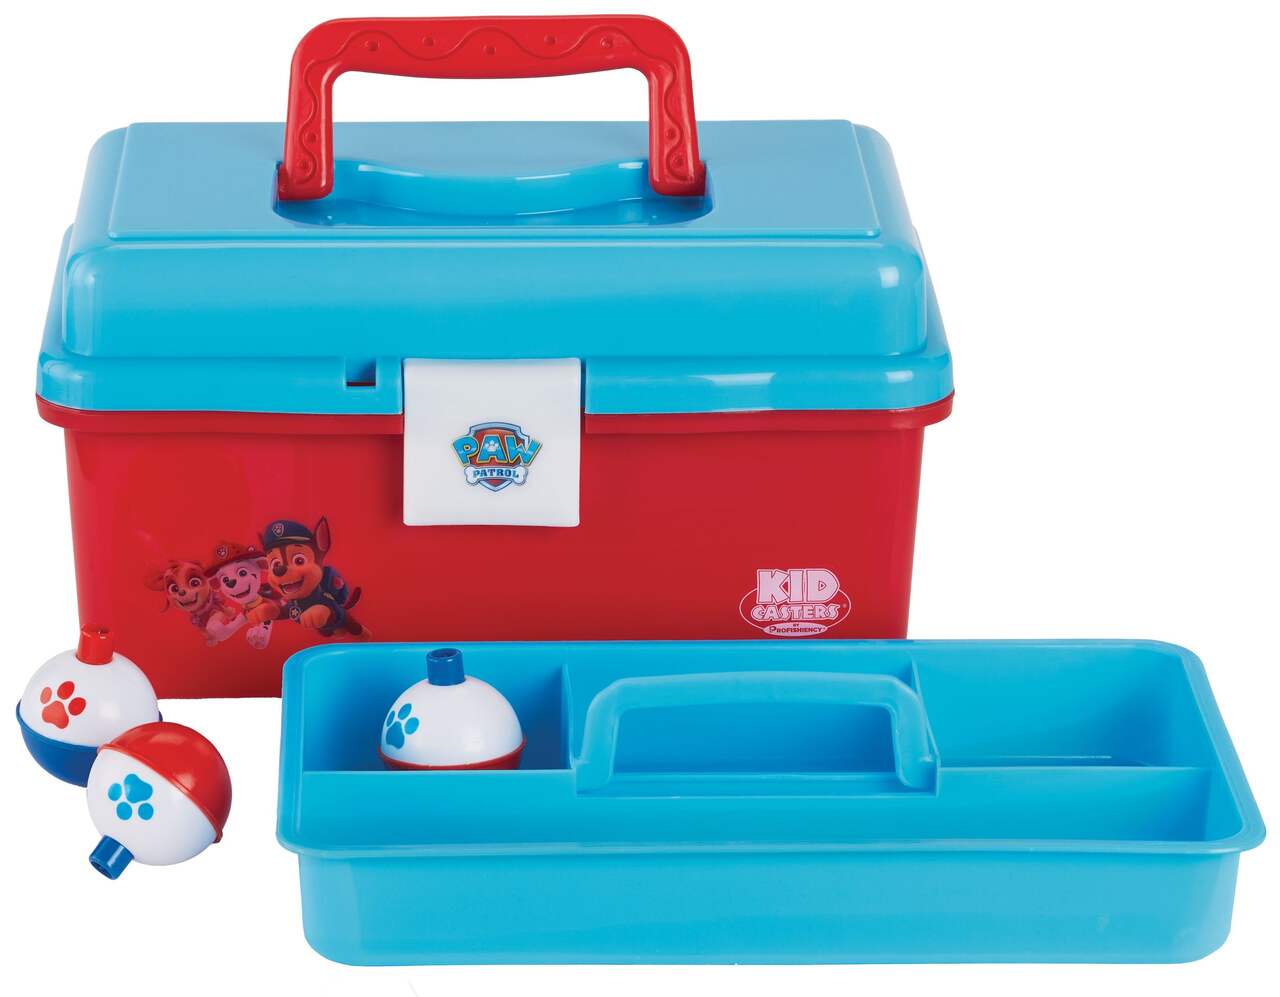 Kid Casters Paw Patrol Hard Tackle Box with Plugs